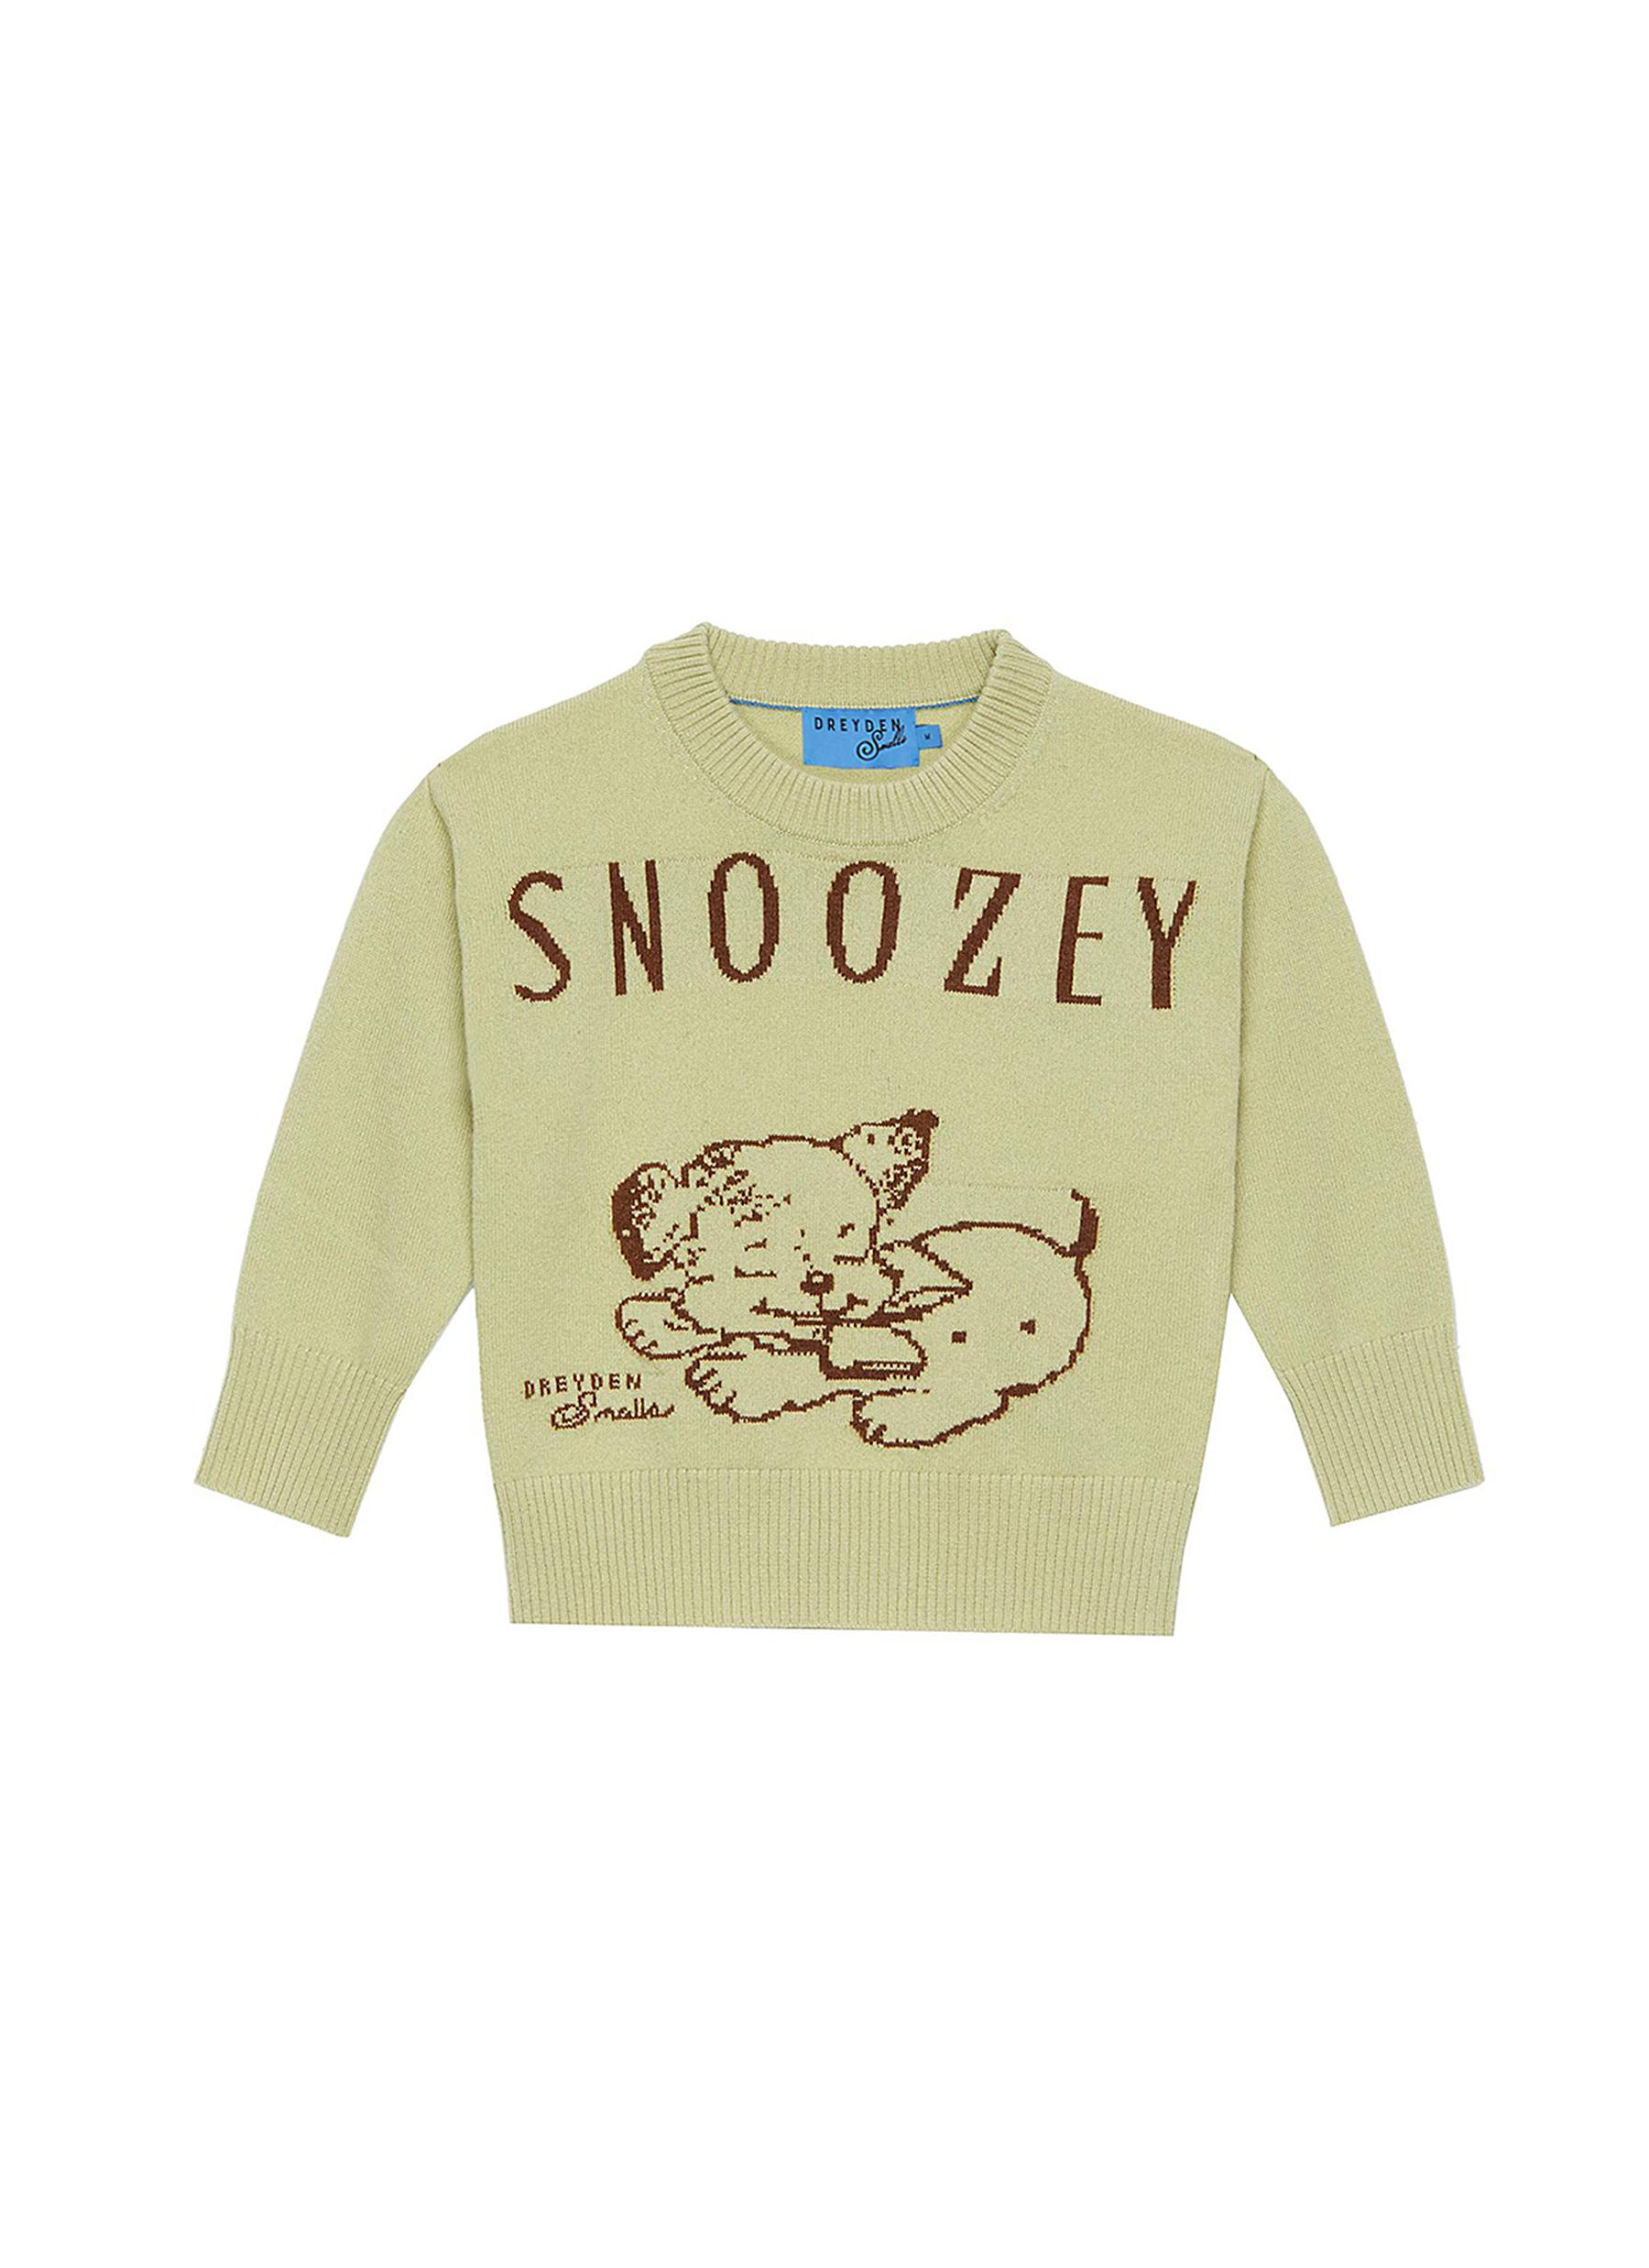 'Snoozey' Graphic Cashmere Knit Kids Sweater